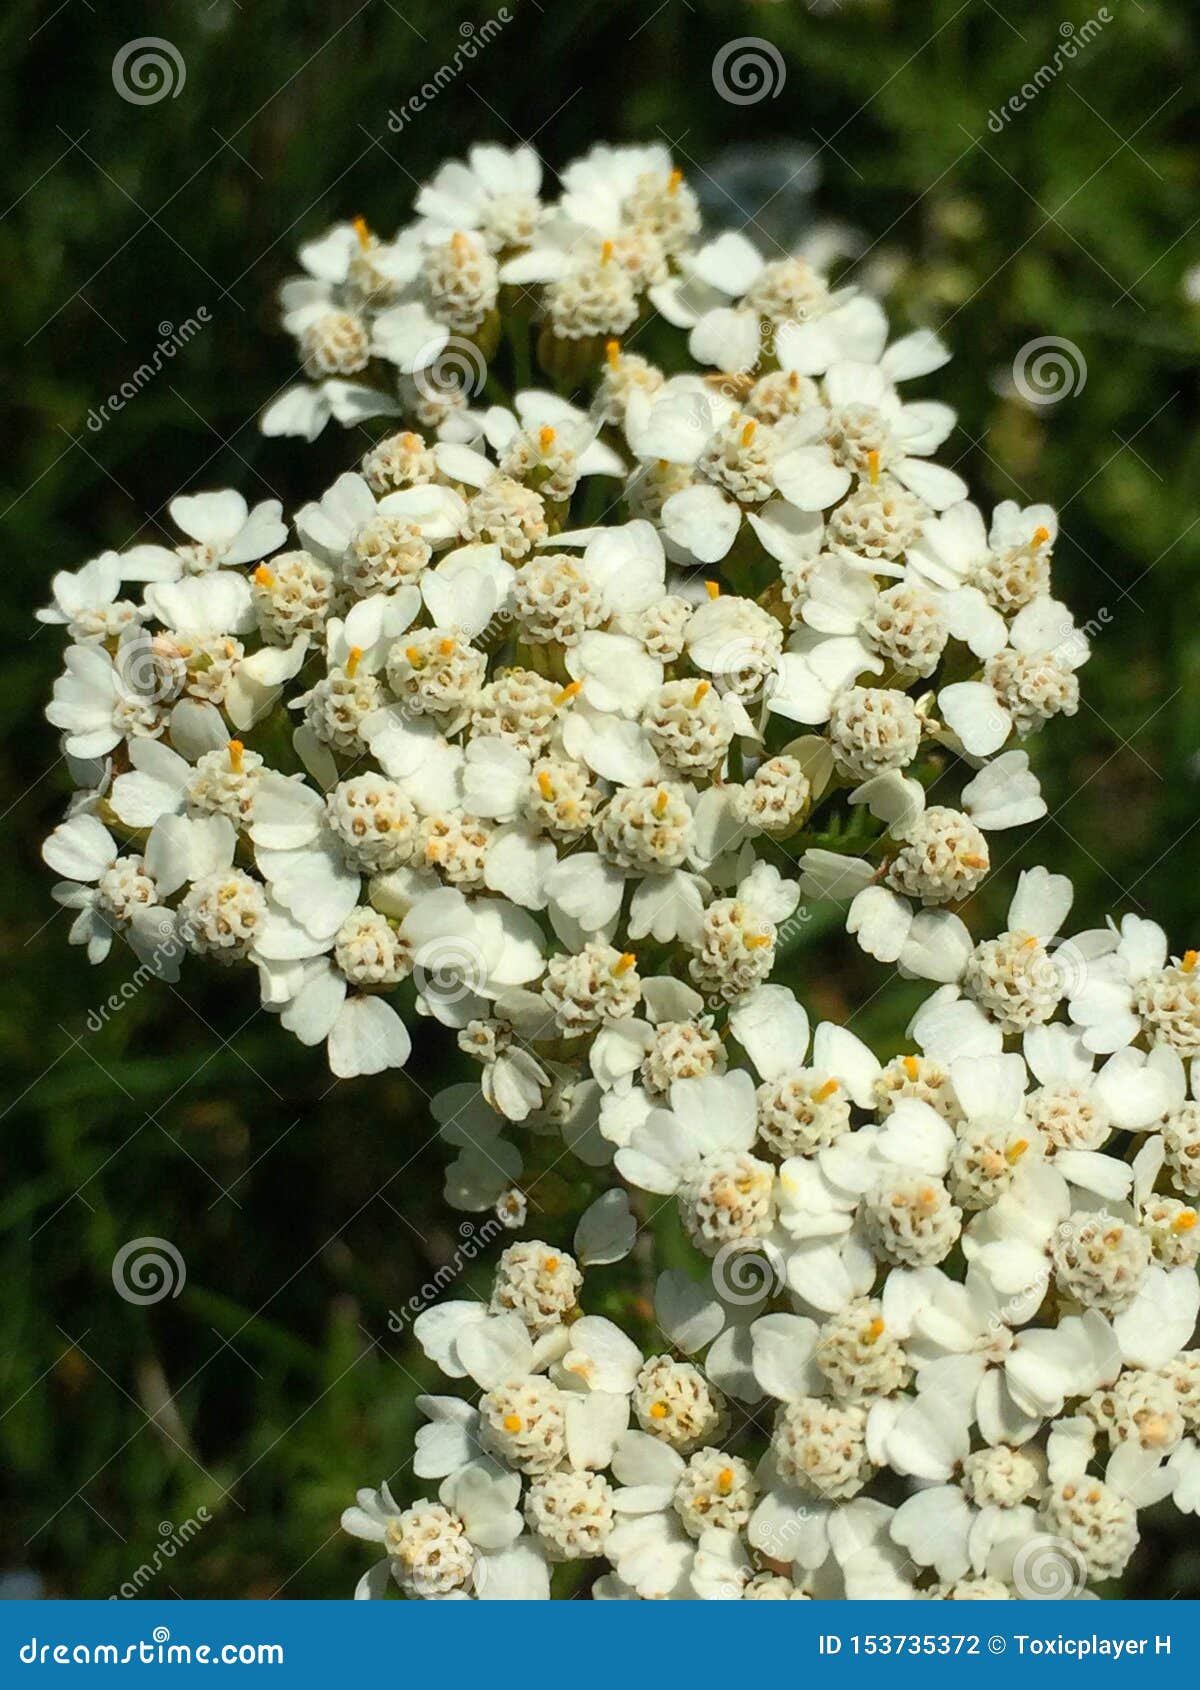 Closeup of Yarrow Blossom in the Wild Stock Photo - Image of herbal ...